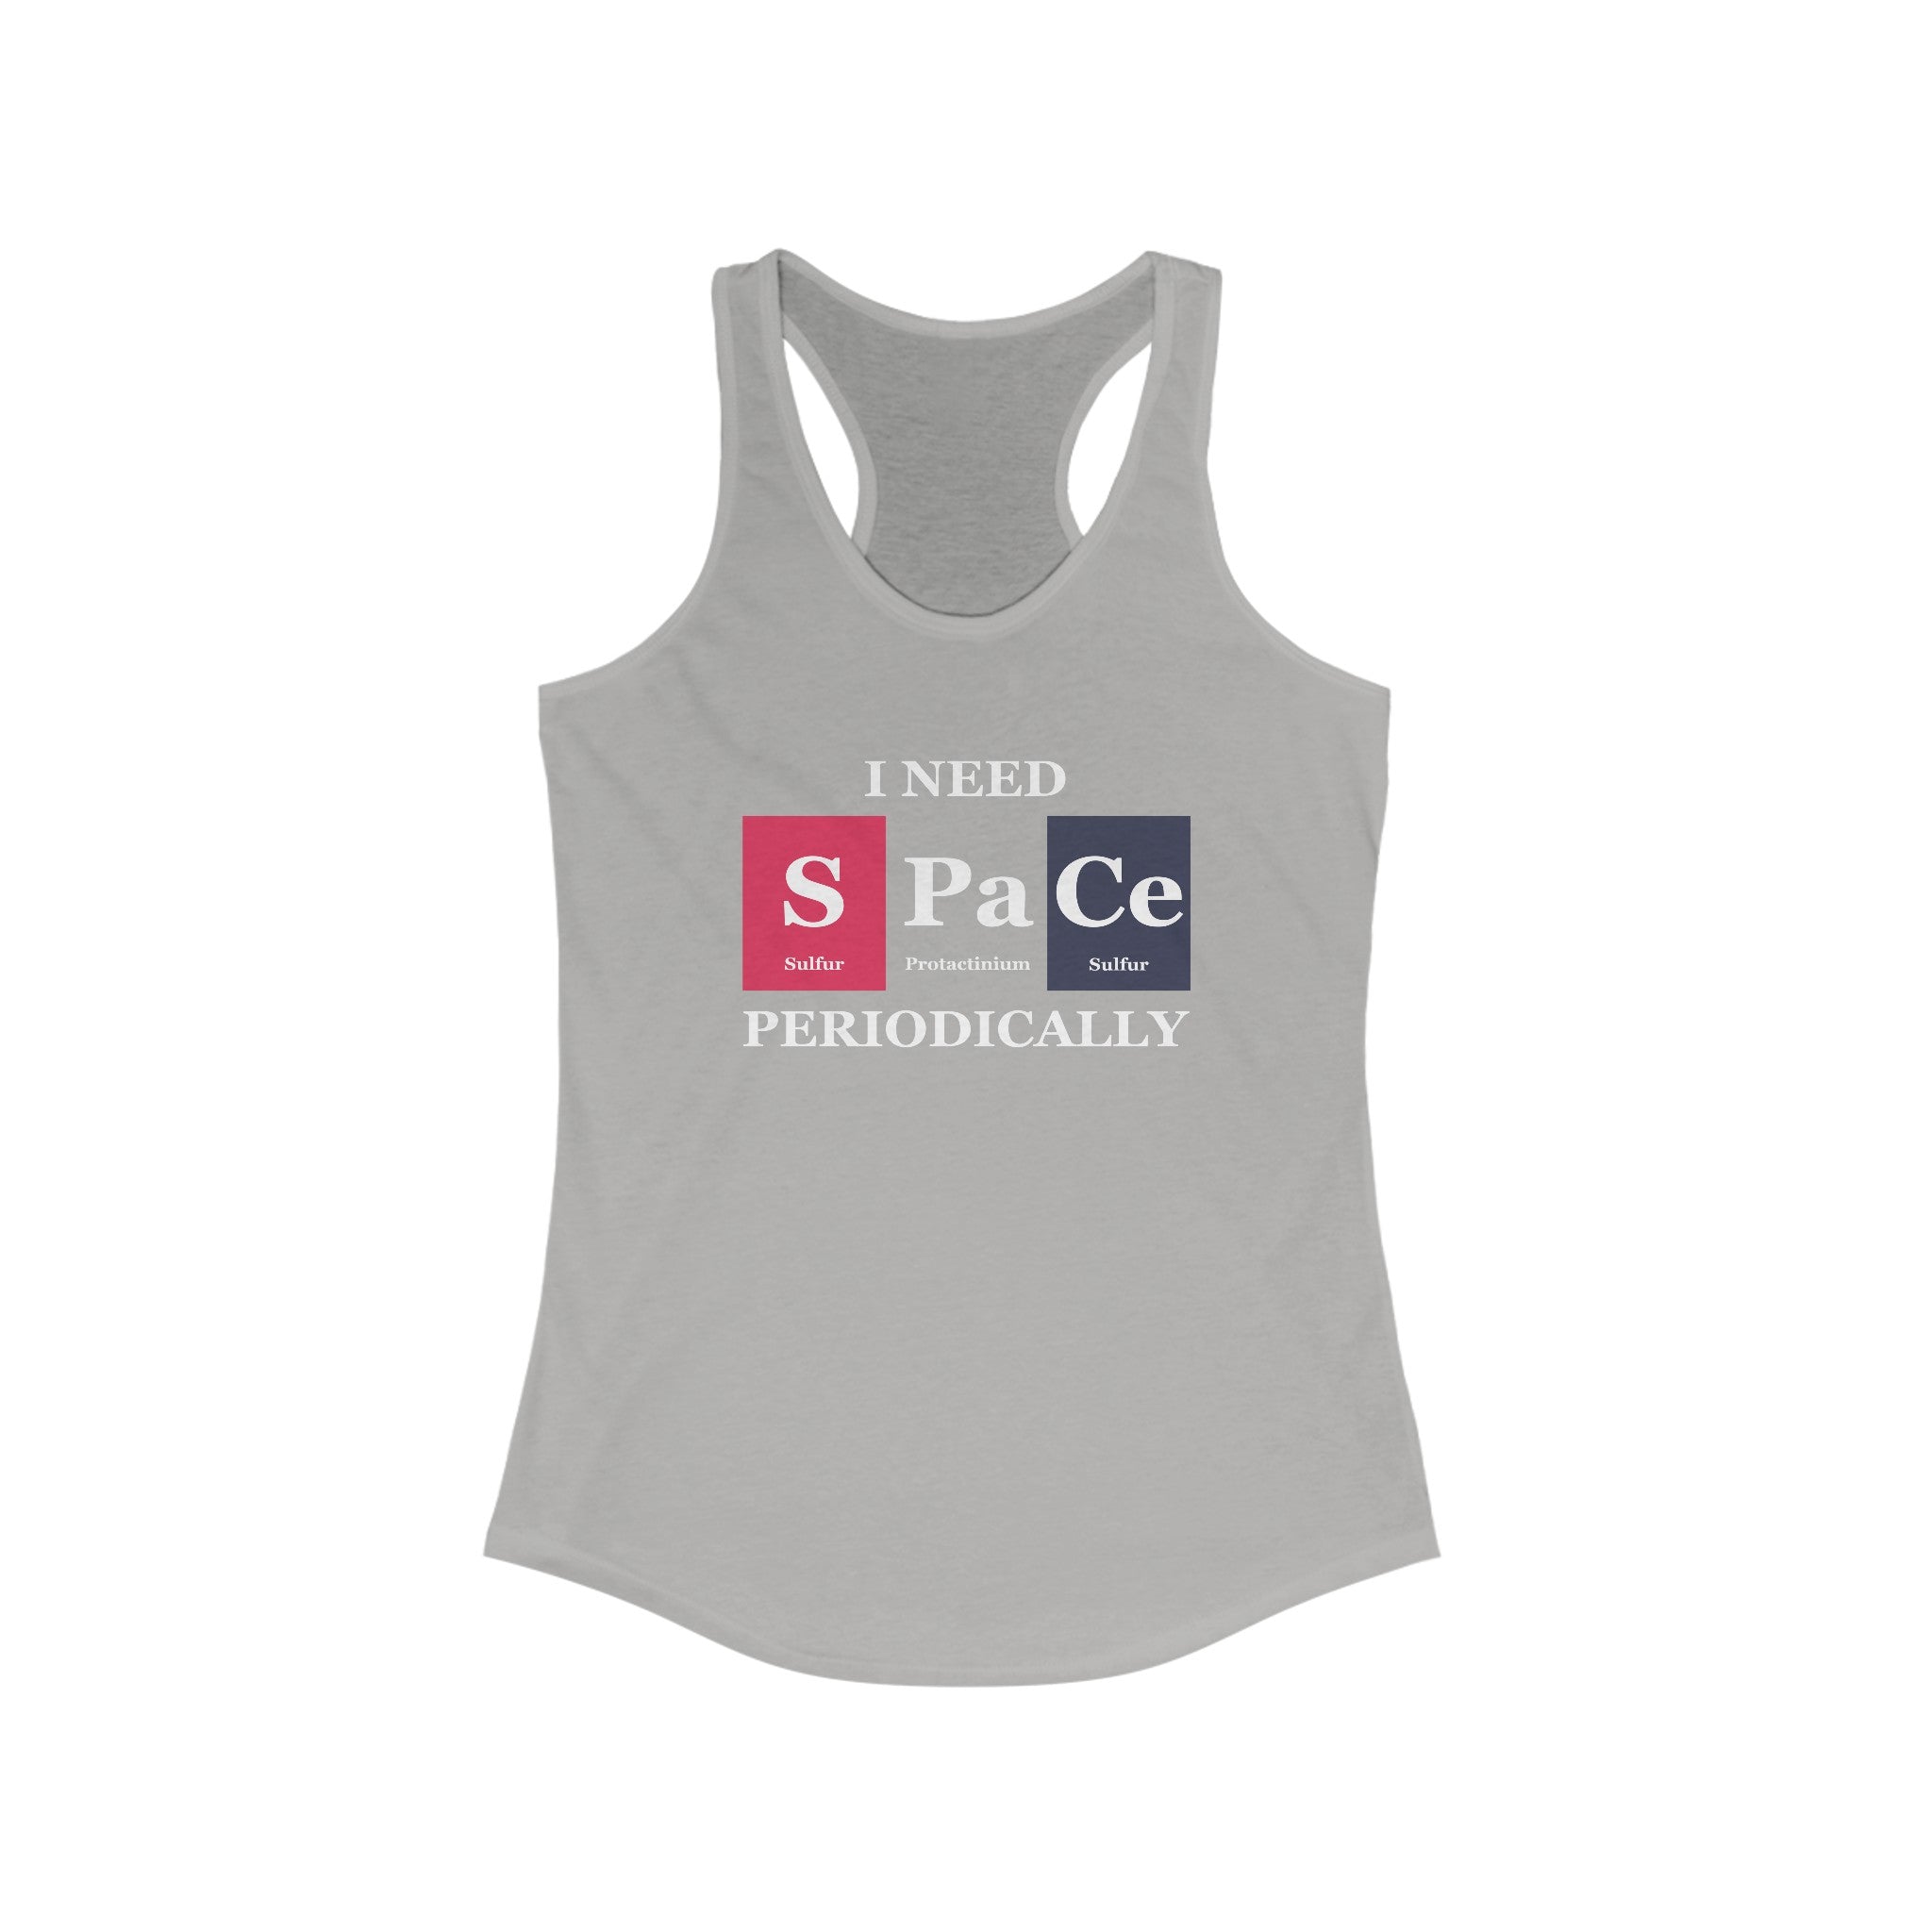 Gray Women's Racerback Tank featuring the text "I NEED S Pa Ce PERIODICALLY", using elements from the periodic table: Sulfur (S), Protactinium (Pa), and Cerium (Ce). Ideal for an active life, this S-Pa-Ce - Women's Racerback Tank is perfect for those who love a clever twist on scientific humor.